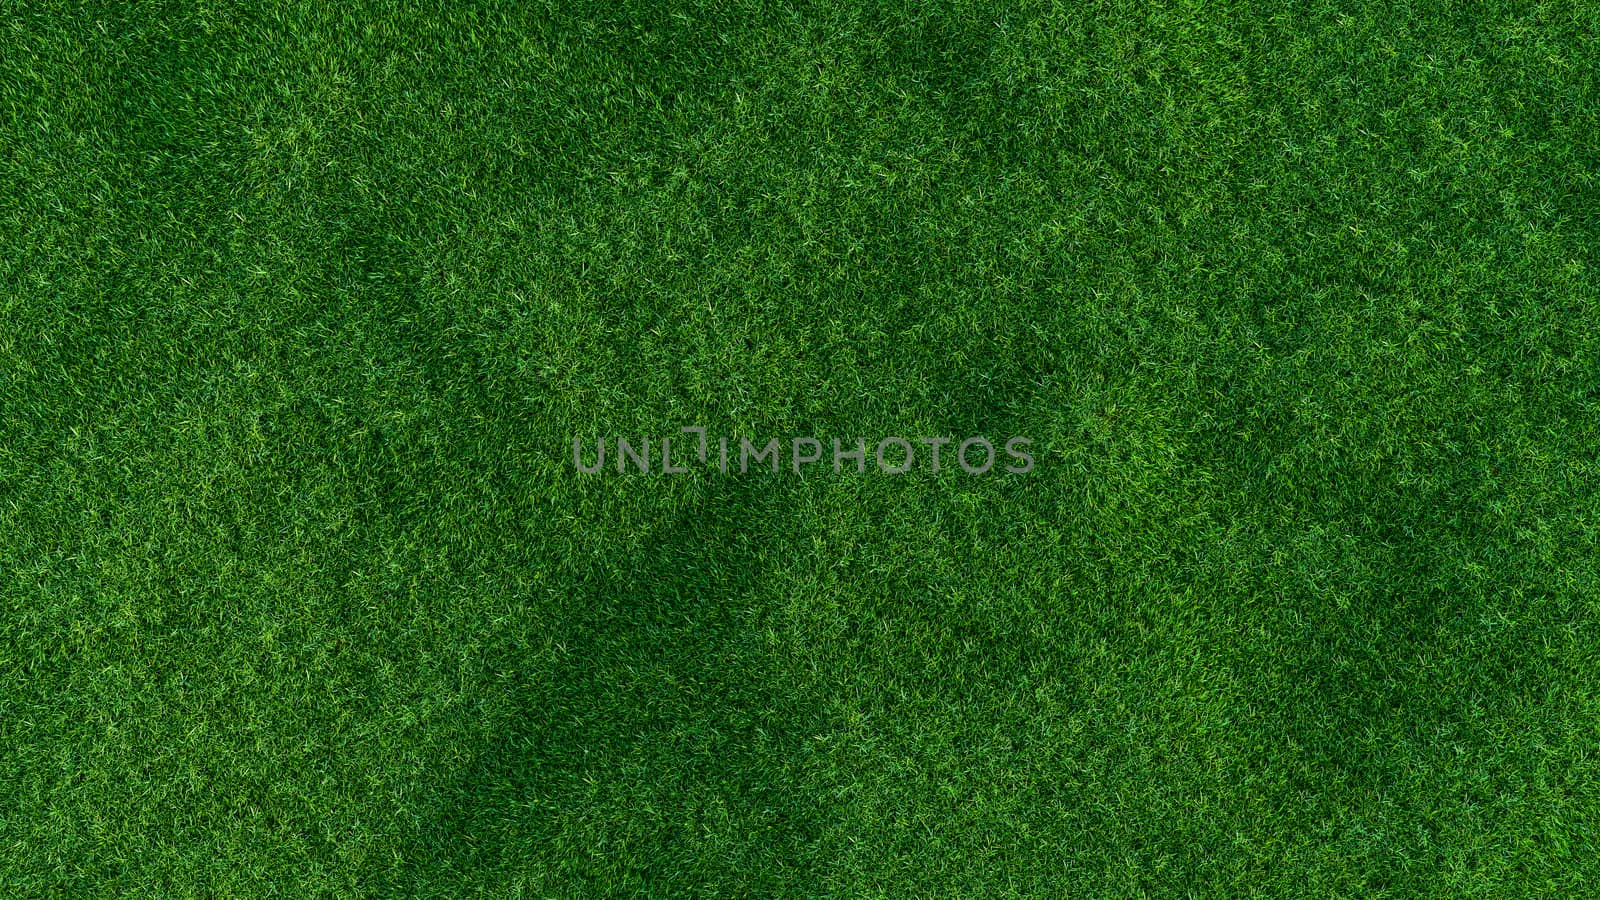 Grass background, fresh green fields, isolated on white background. 3d illustration